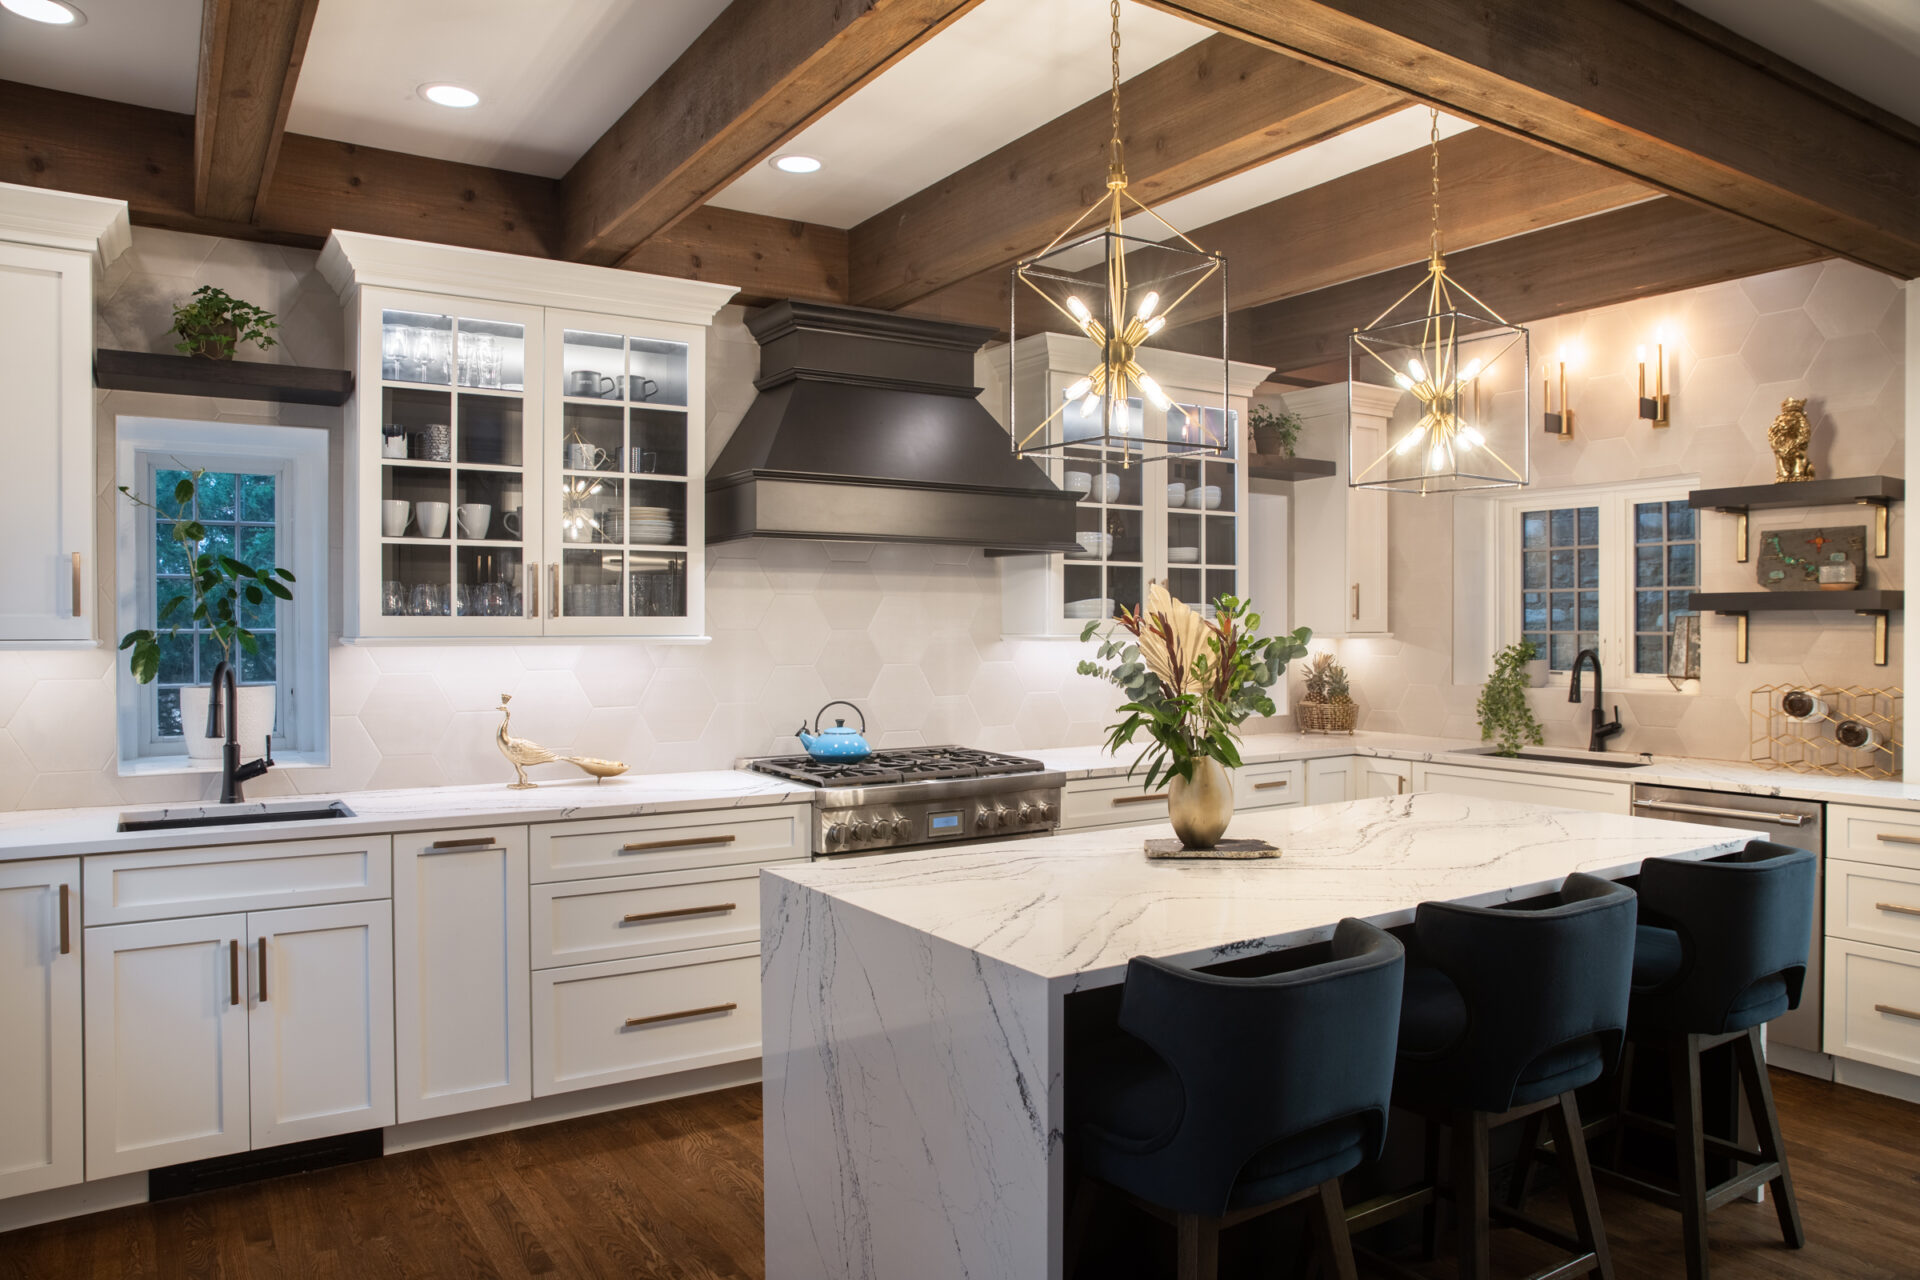 Remodeled kitchen with wood beams on ceiling, white cabinets and white marble countertops with waterfall edge on island, with row of three seats.